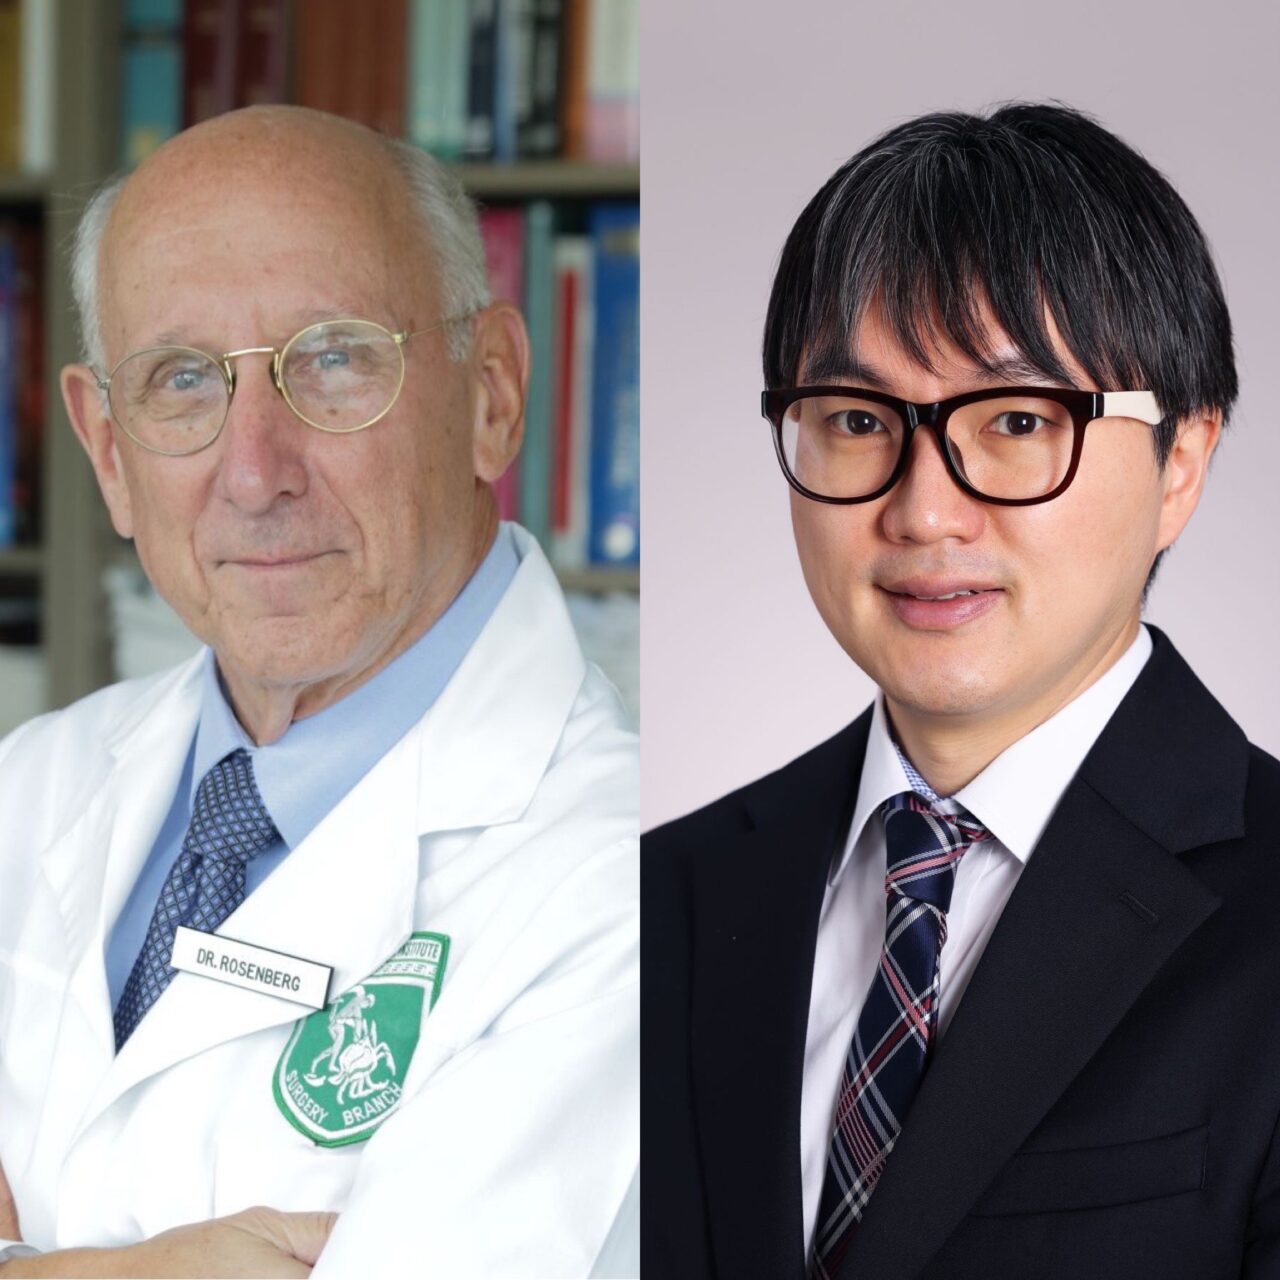 Congratulations to Dr. Steven A. Rosenberg and his colleague Dr. Sanghyun Kim for receiving the first-ever Cancer Immunology Research Award for Outstanding Journal Article at AACR24! – NCI Center for Cancer Research